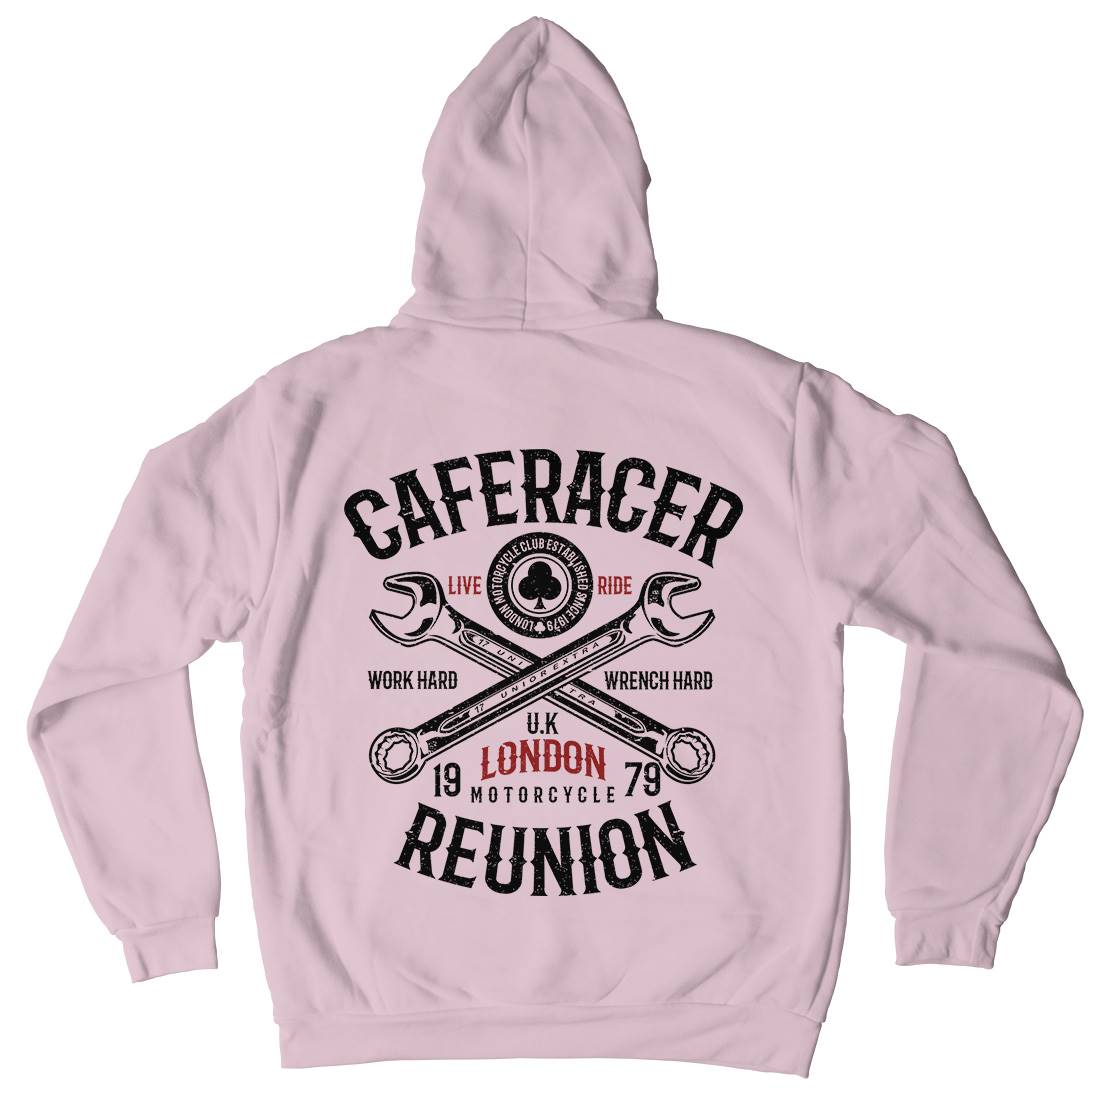 Caferacer Reunion Kids Crew Neck Hoodie Motorcycles A025